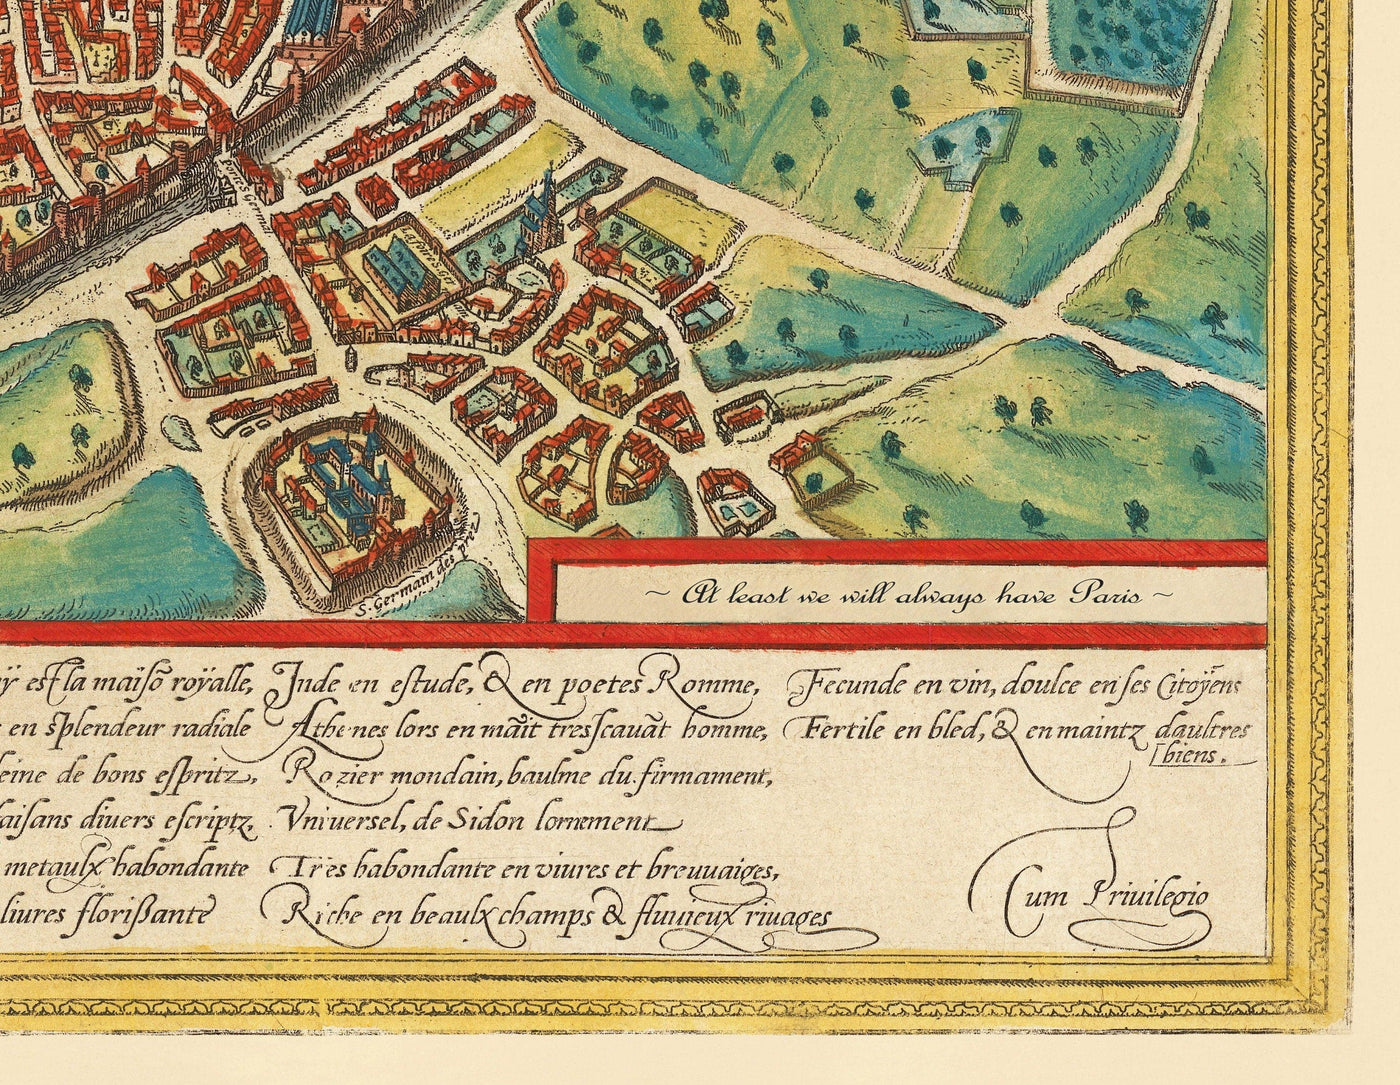 Old Map of Lisbon, Portugal by Georg Braun in 1572 - Castle, Cathedral, City Walls, Downtown, Old Streets